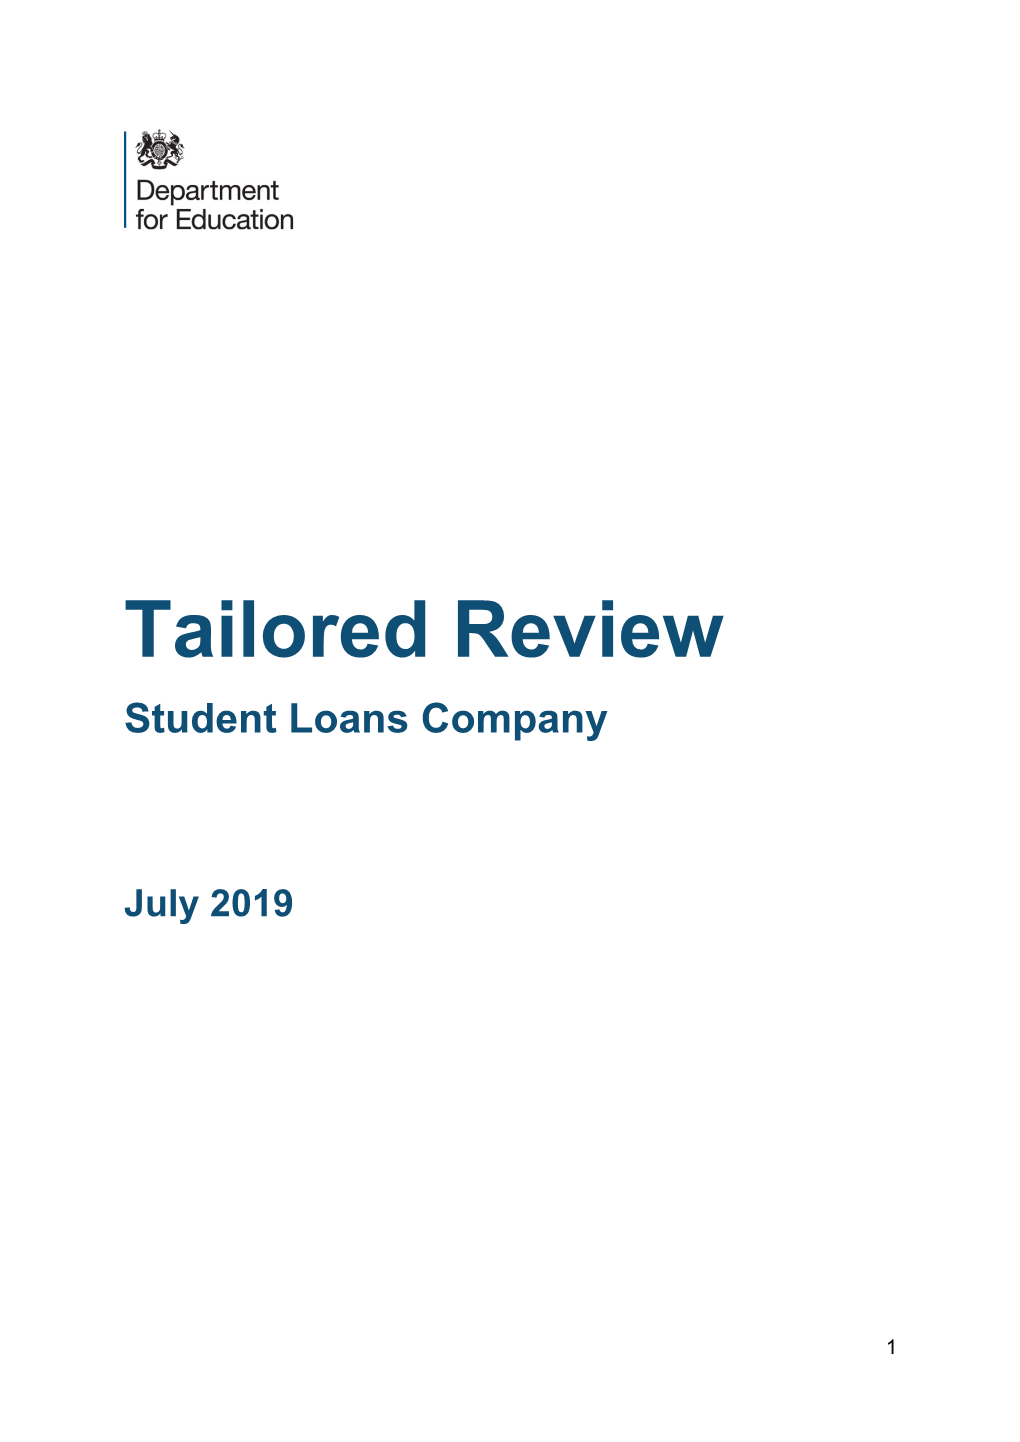 Tailored Review of the Student Loans Company